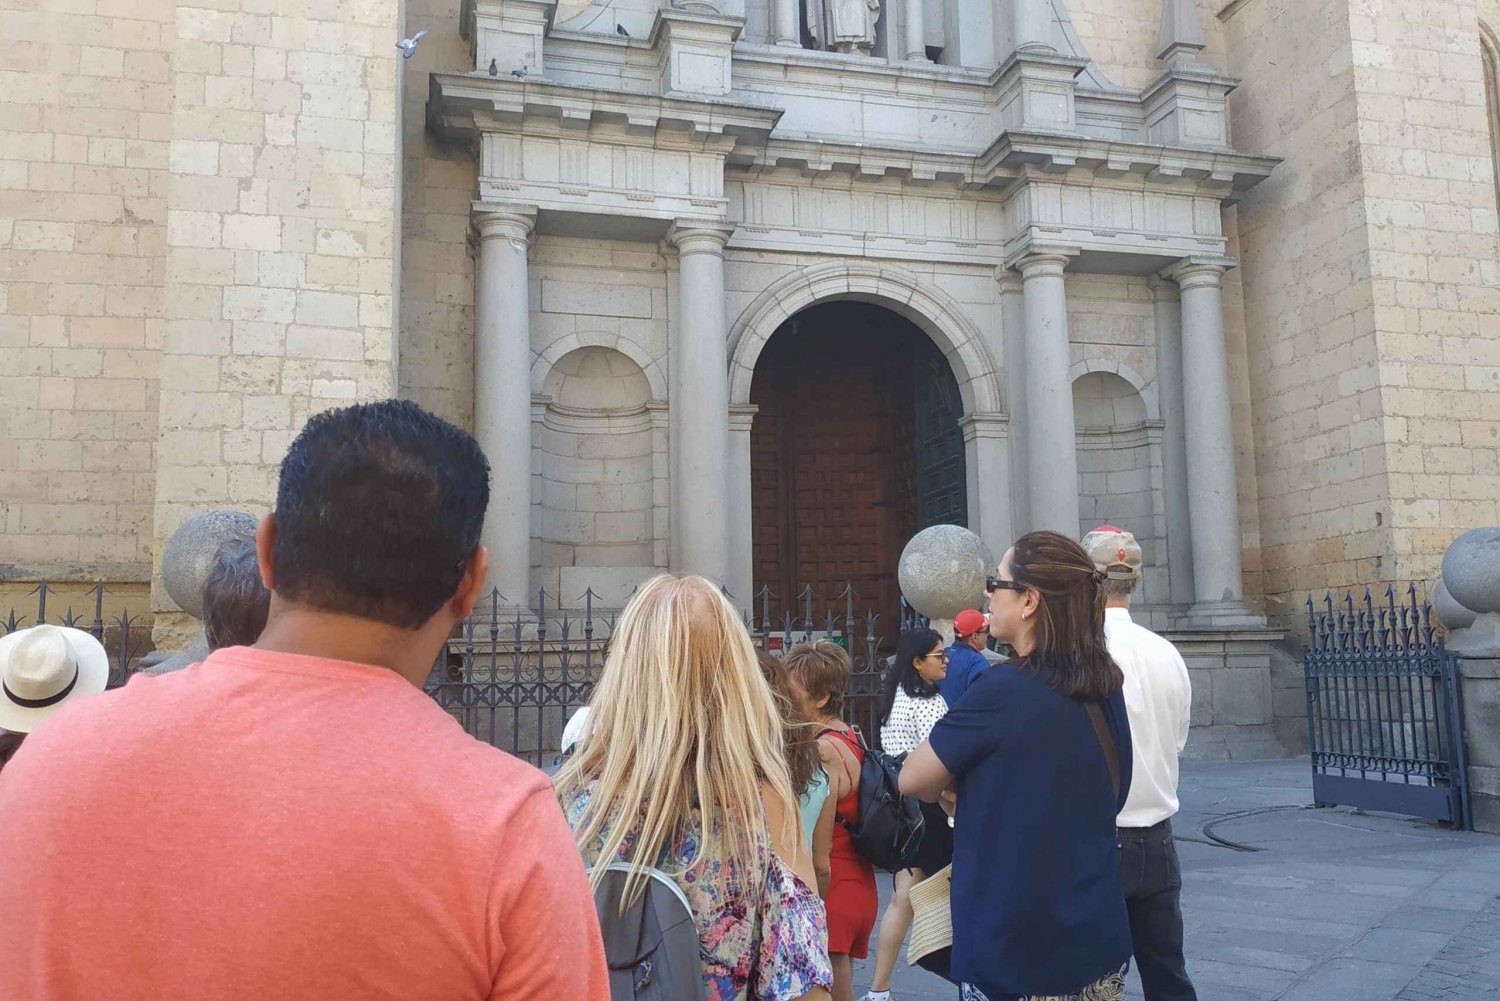 From Madrid: A day tour to Segovia and Avila